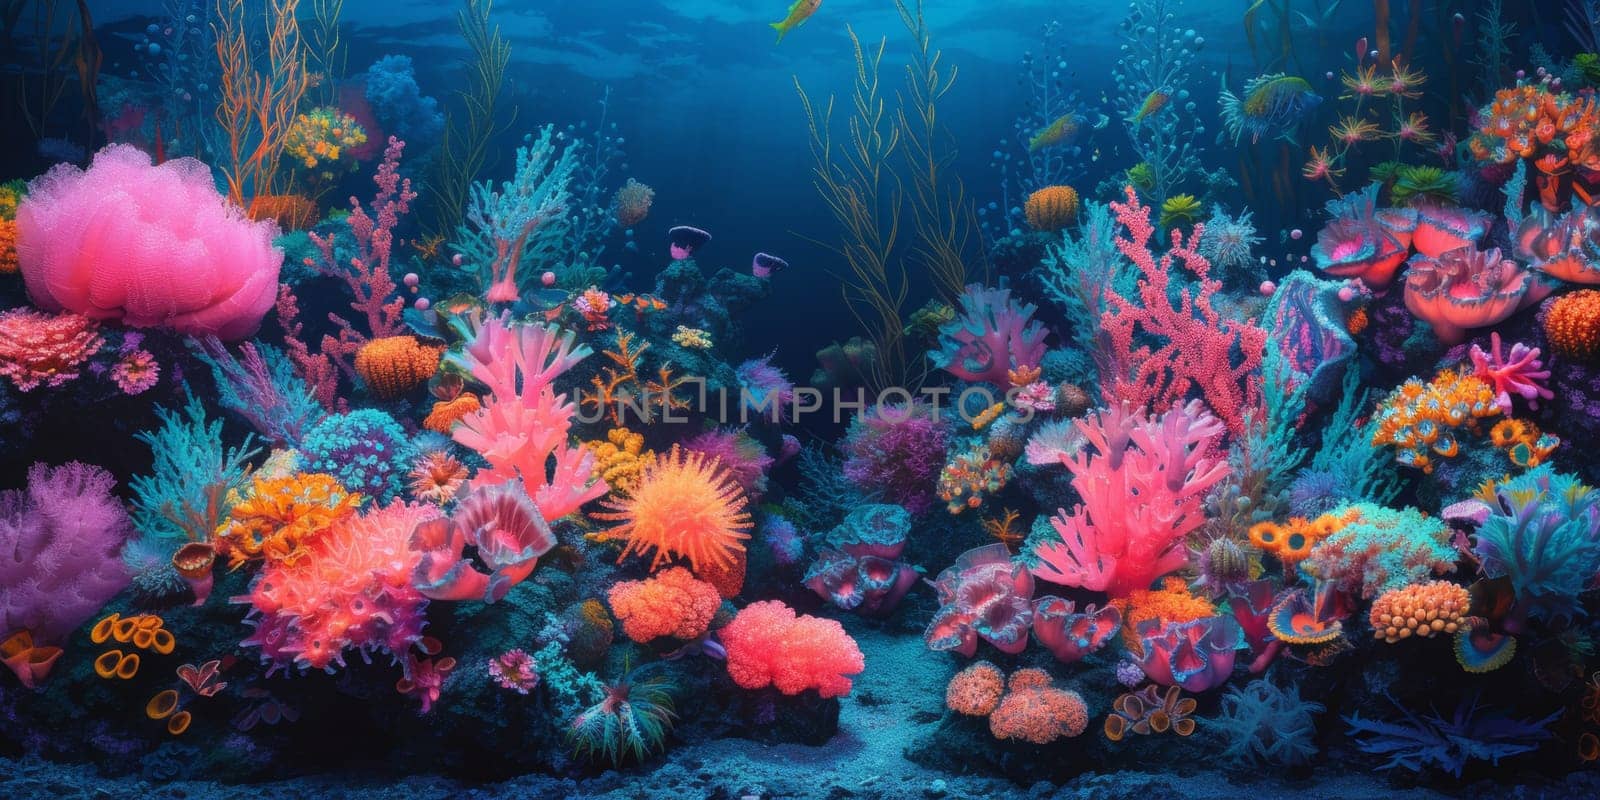 A colorful underwater scene with many different types of coral, AI by starush